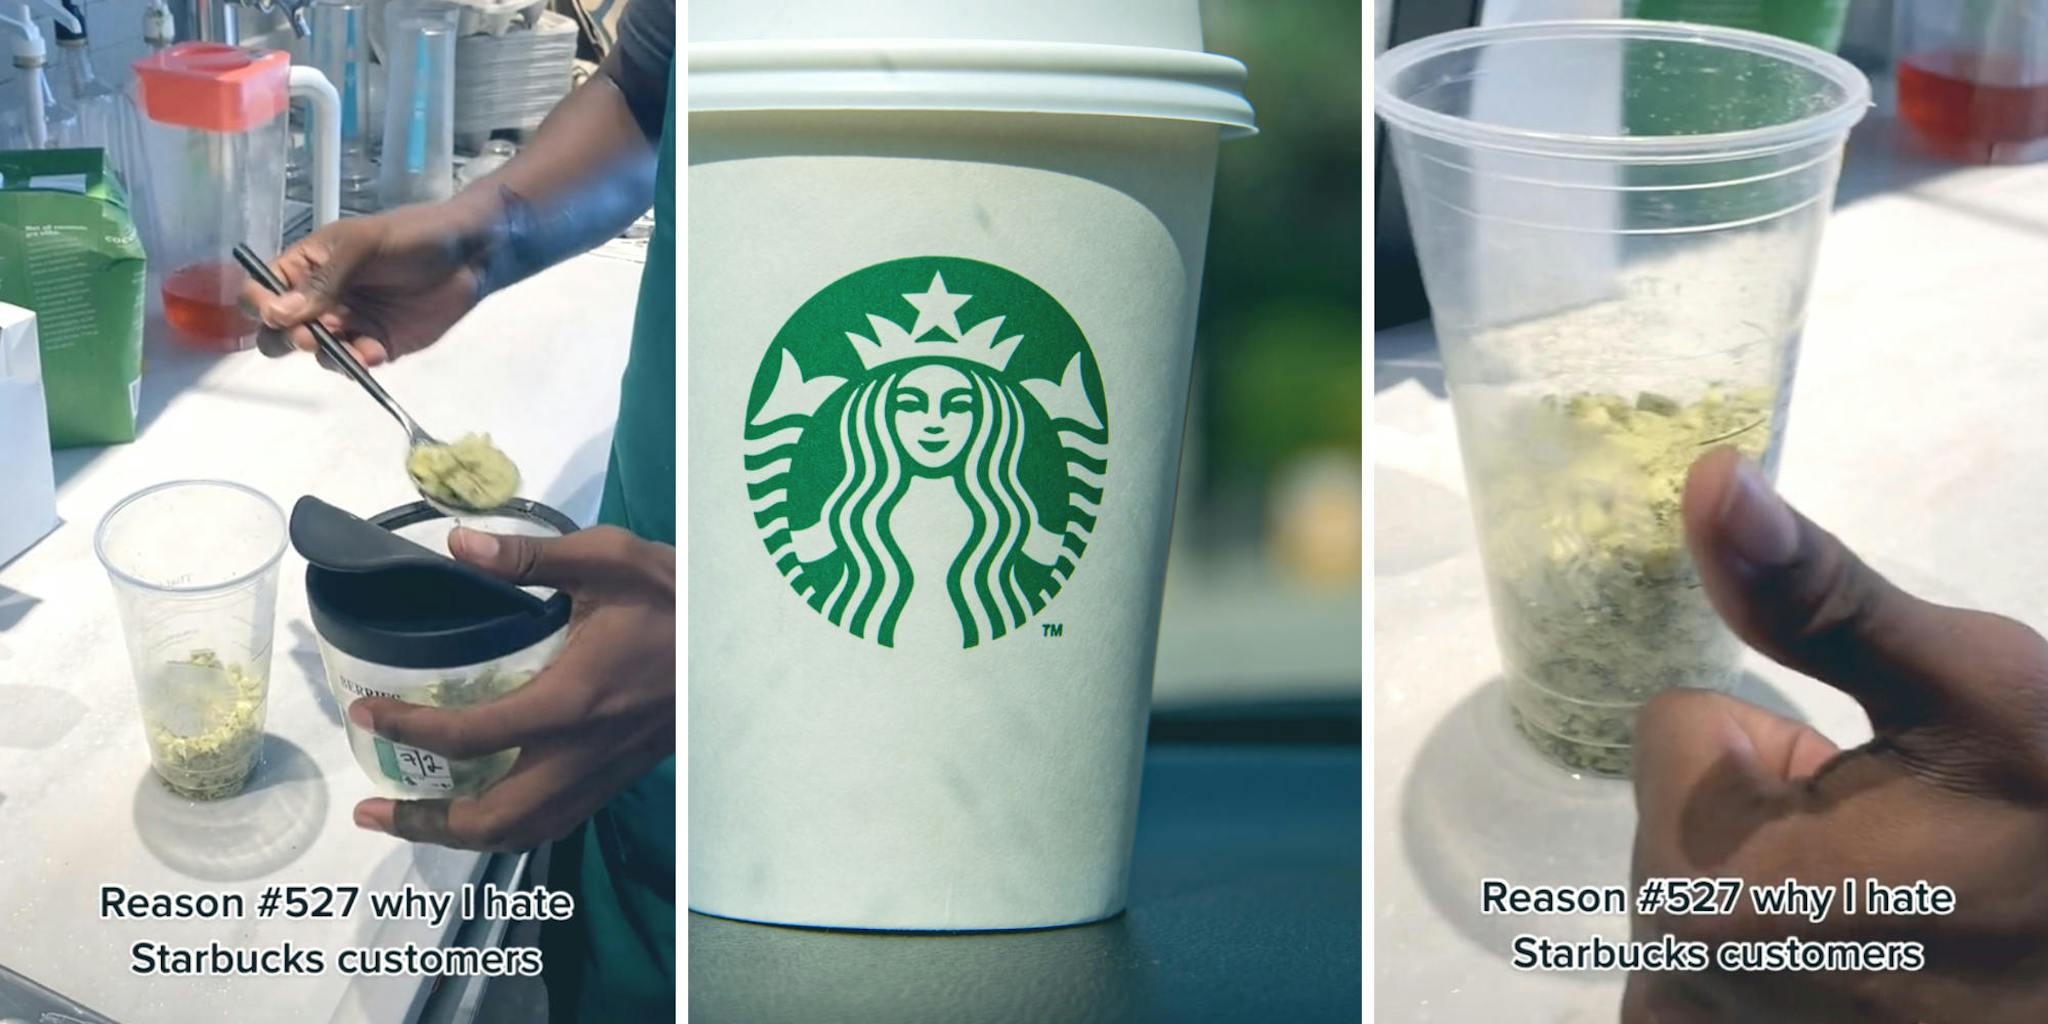 ‘And they don’t even need to feel ashamed since they mobile ordered’: Worker reveals ‘reason #527 why they hate Starbucks customers’ in viral TikTok